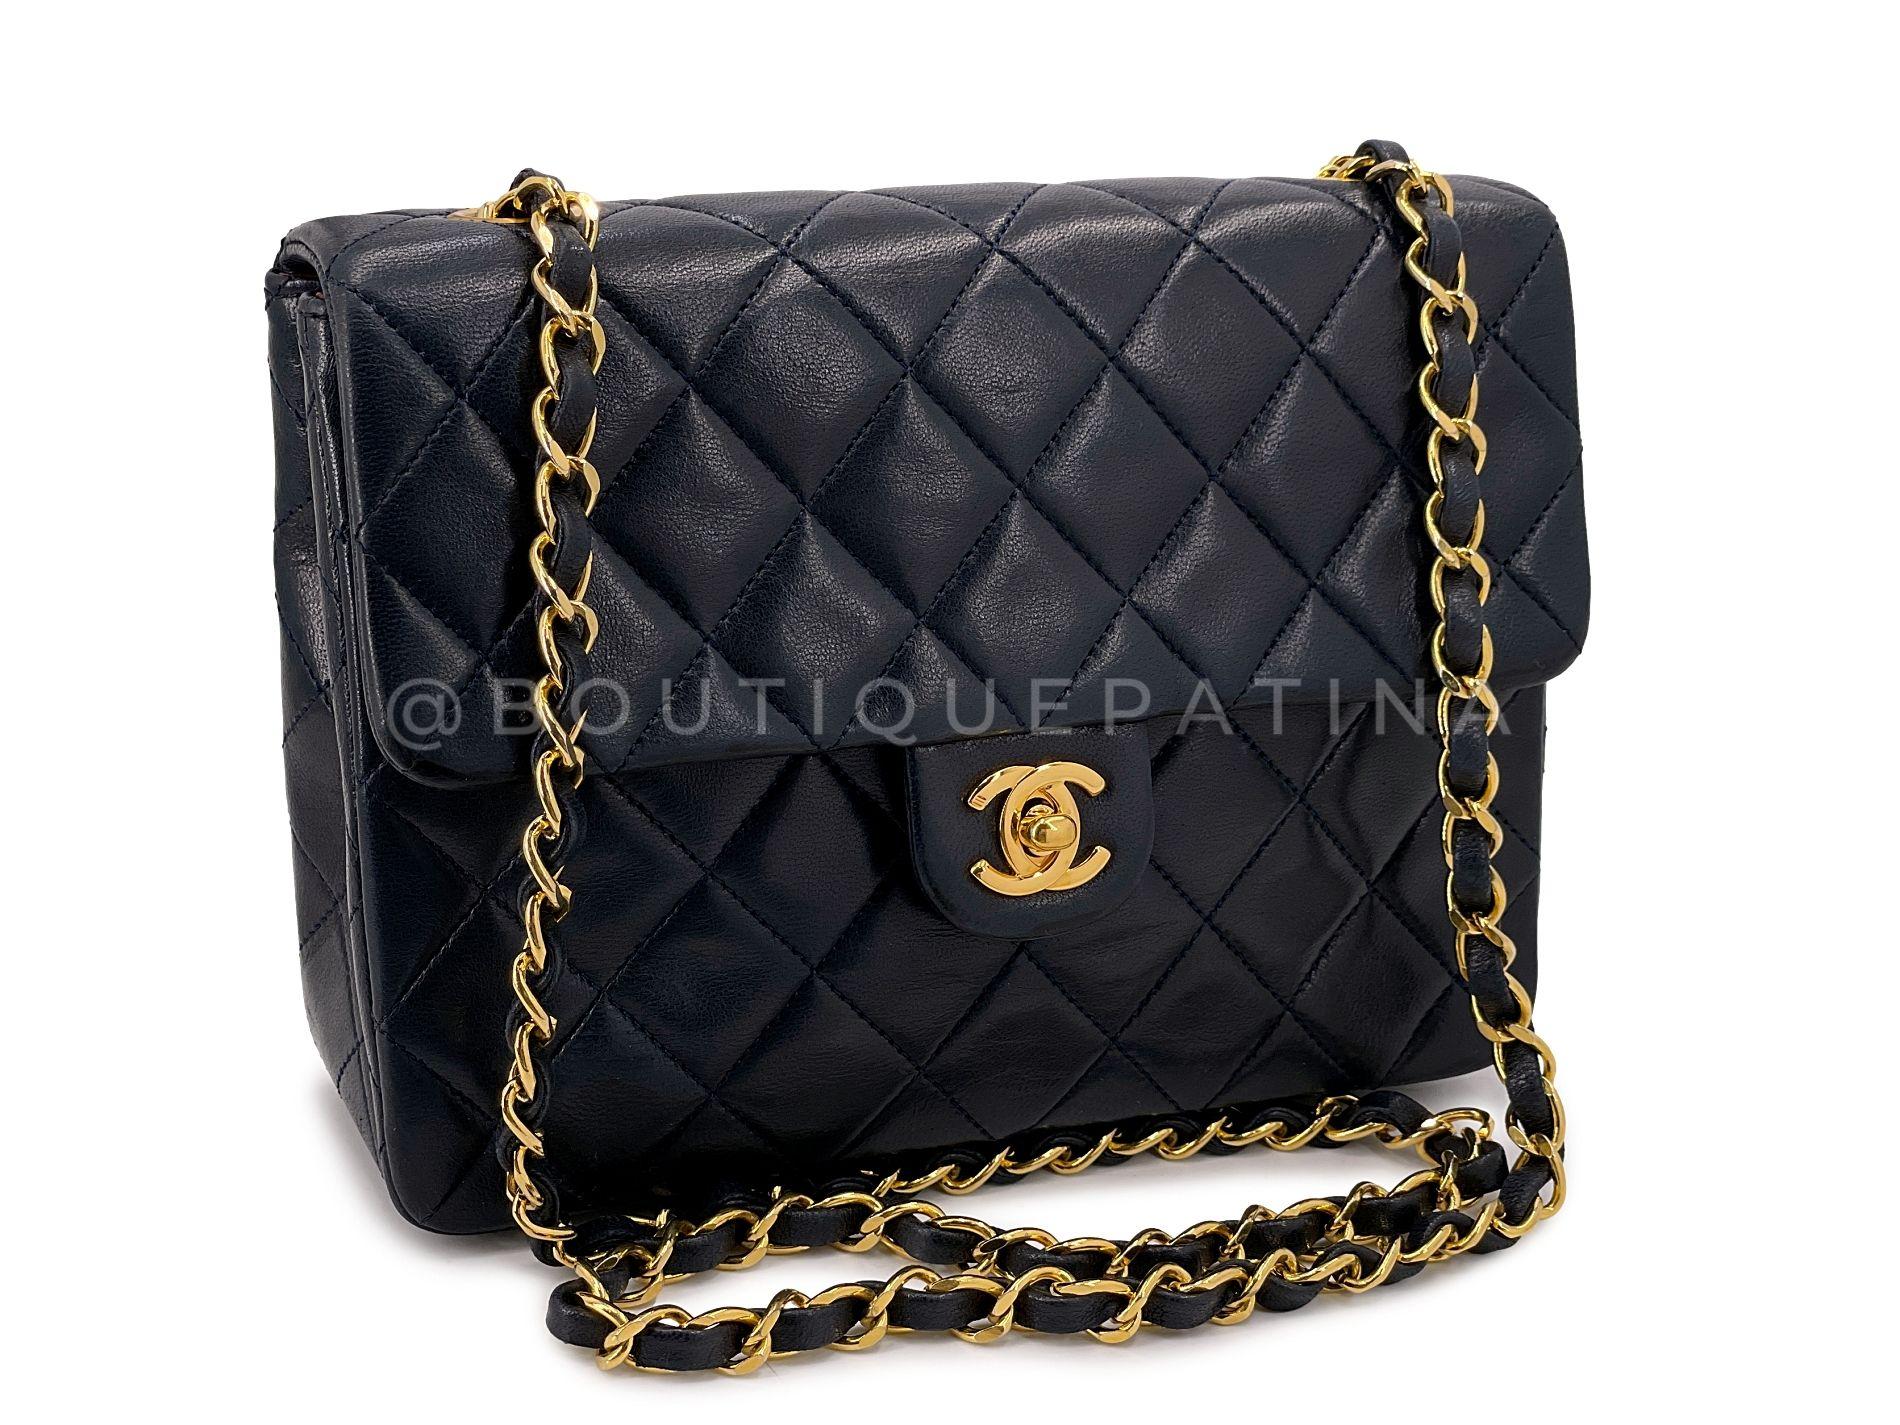 Store item: 67940
Vintage classic Chanel bags are known for their petal-soft lambskin, 24k gold plated hardware and sturdy craftsmanship.
A slightly wider version of the Chanel Classic Vintage Square Mini flap, this bag has the width of a